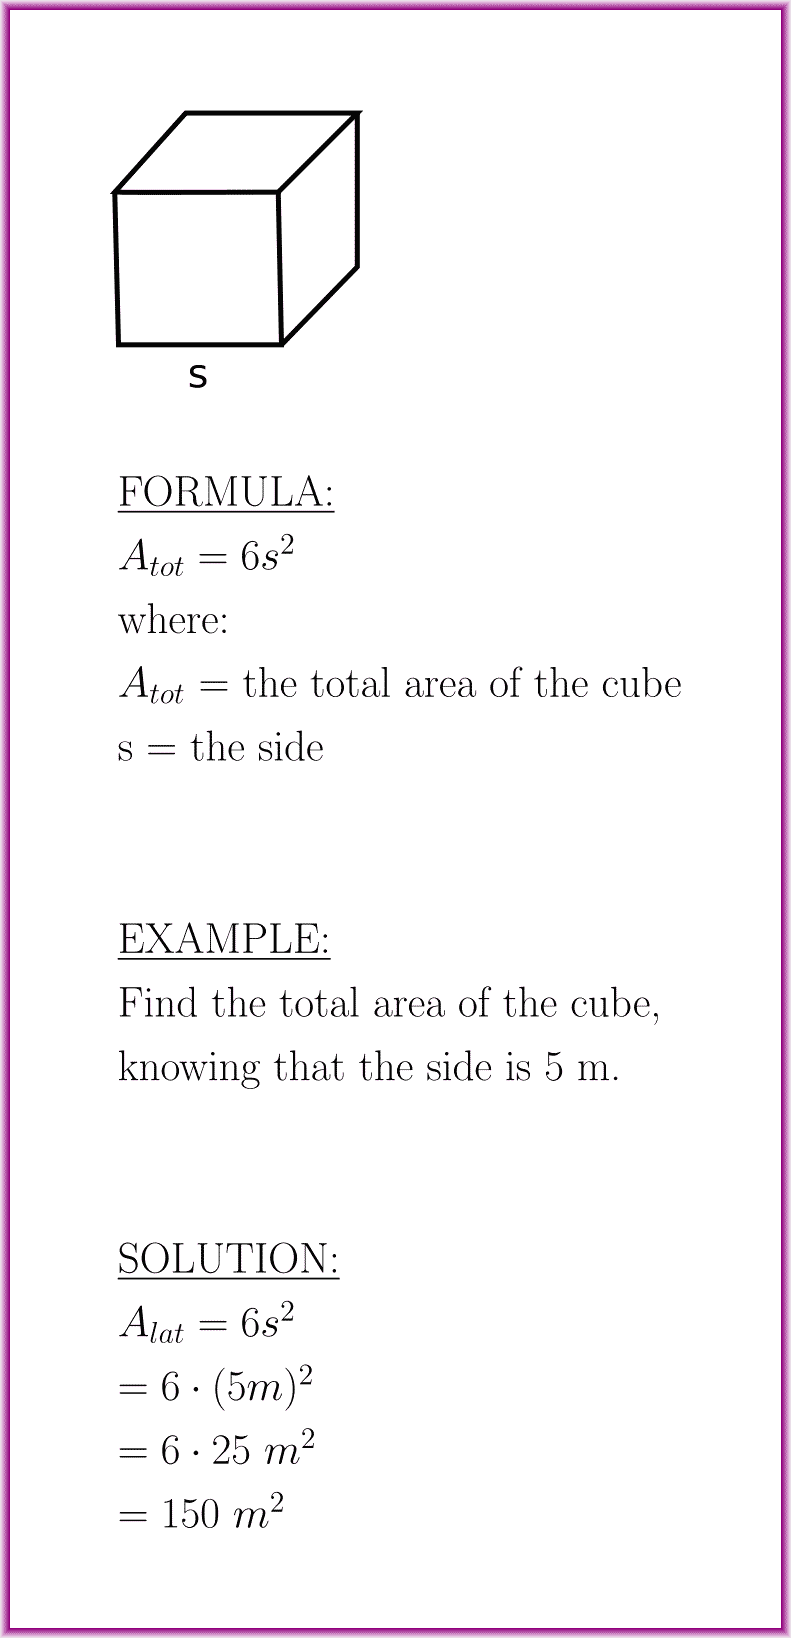 The total area of the cube (formula with example)